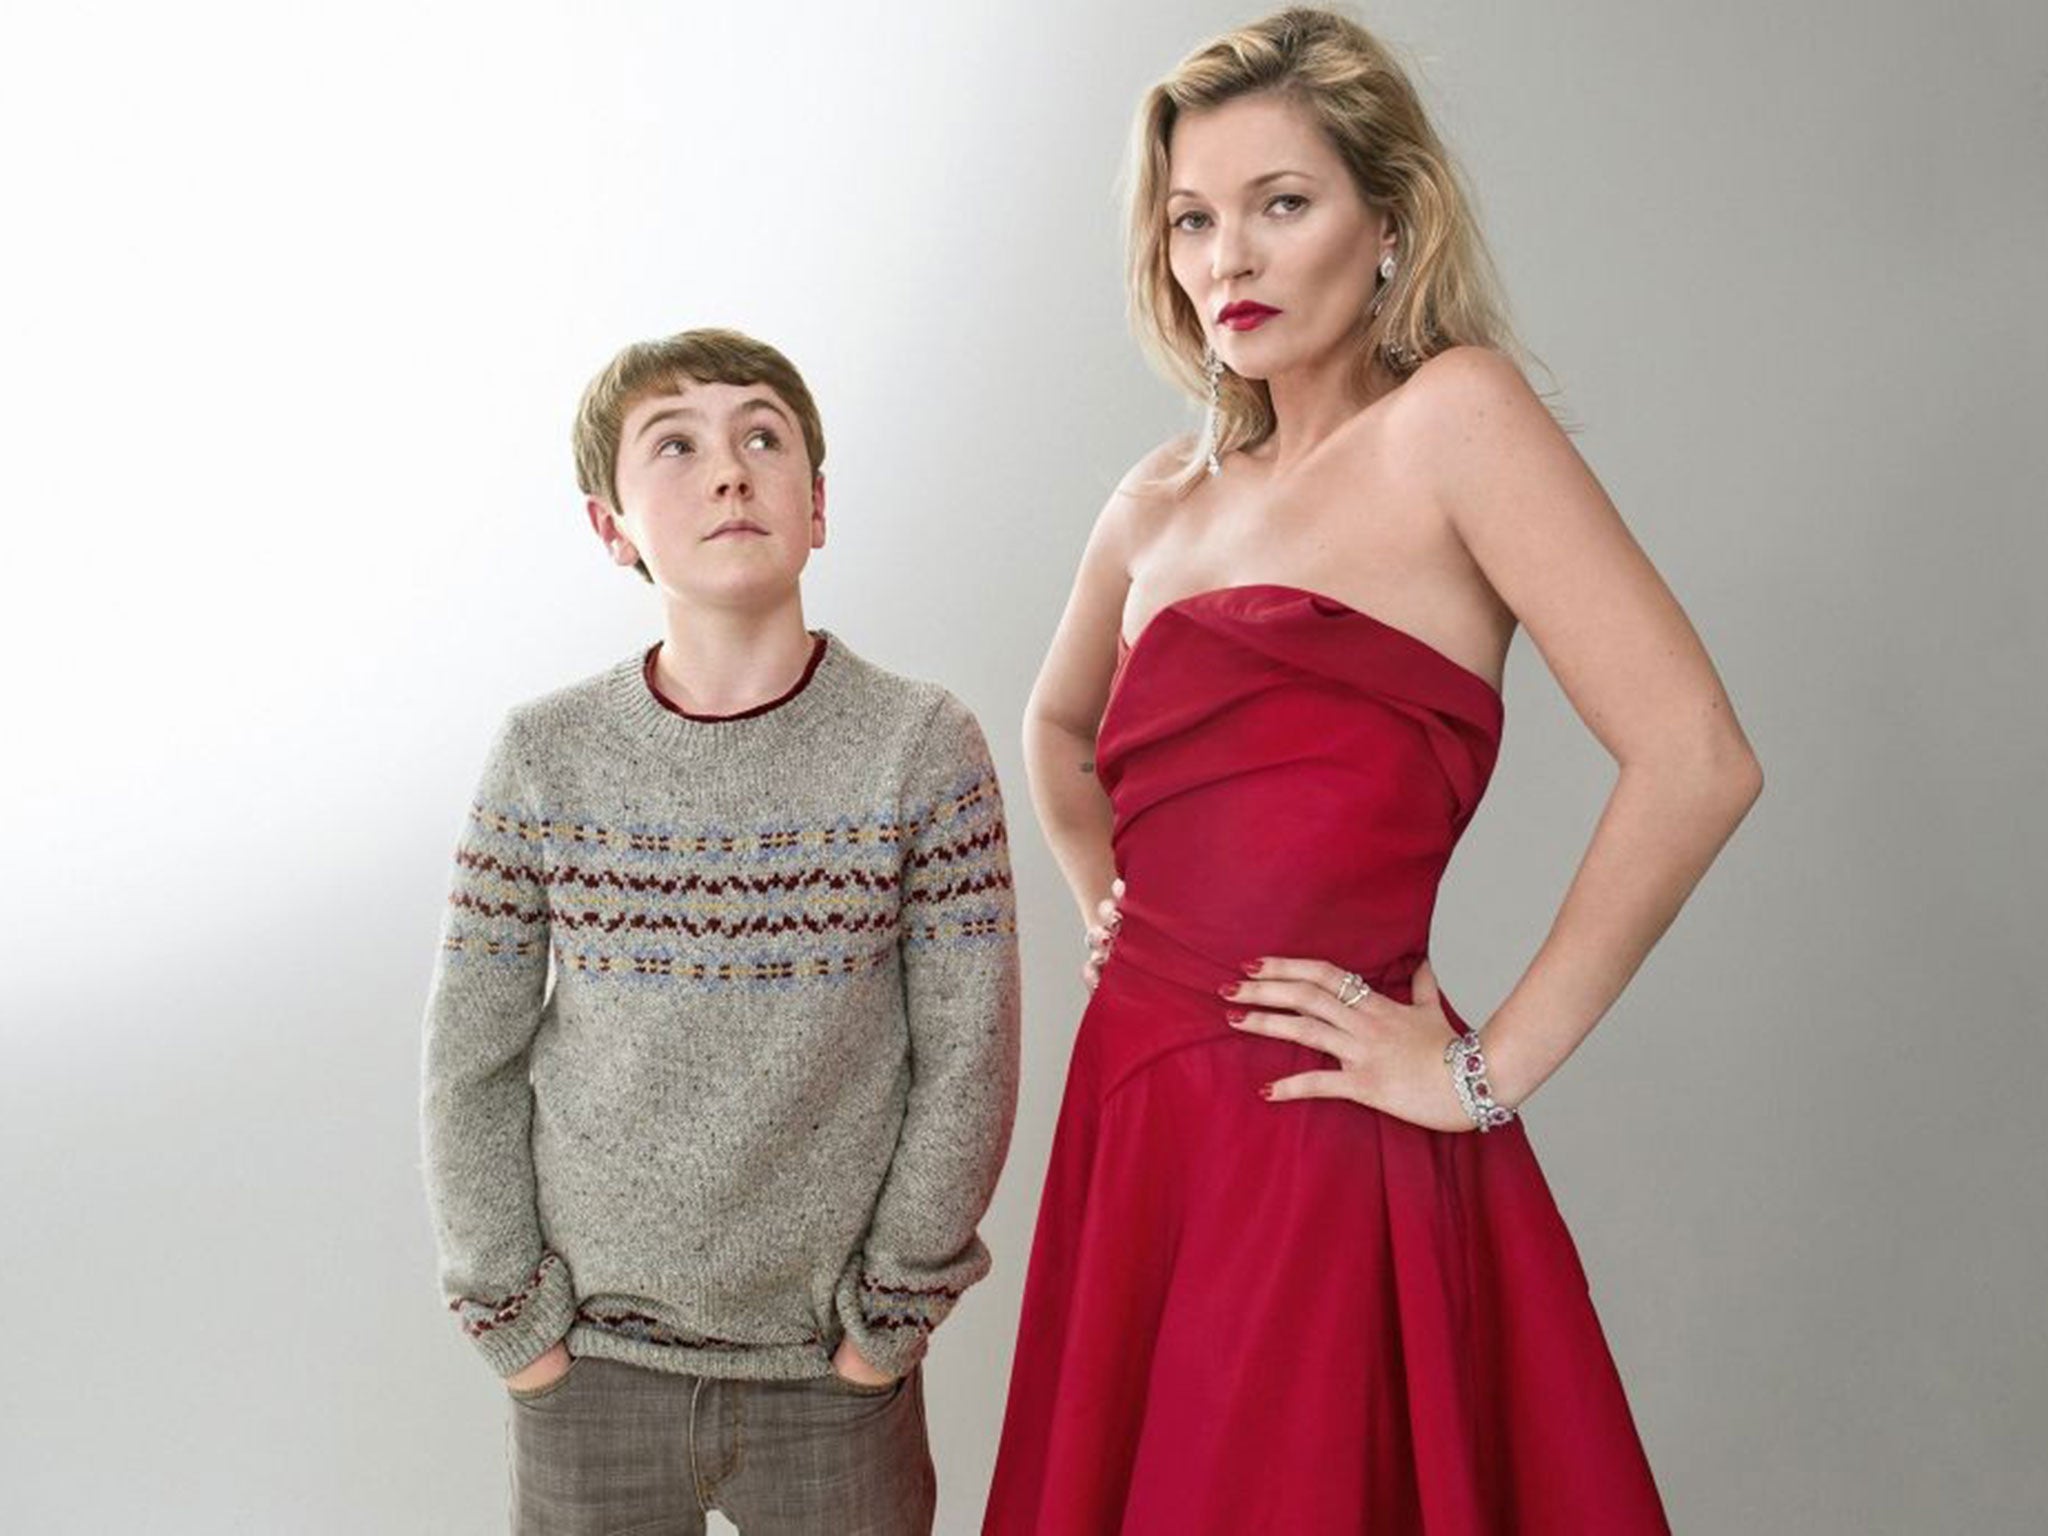 Kate Moss and actor Billy Kennedy in The Boy in the Dress